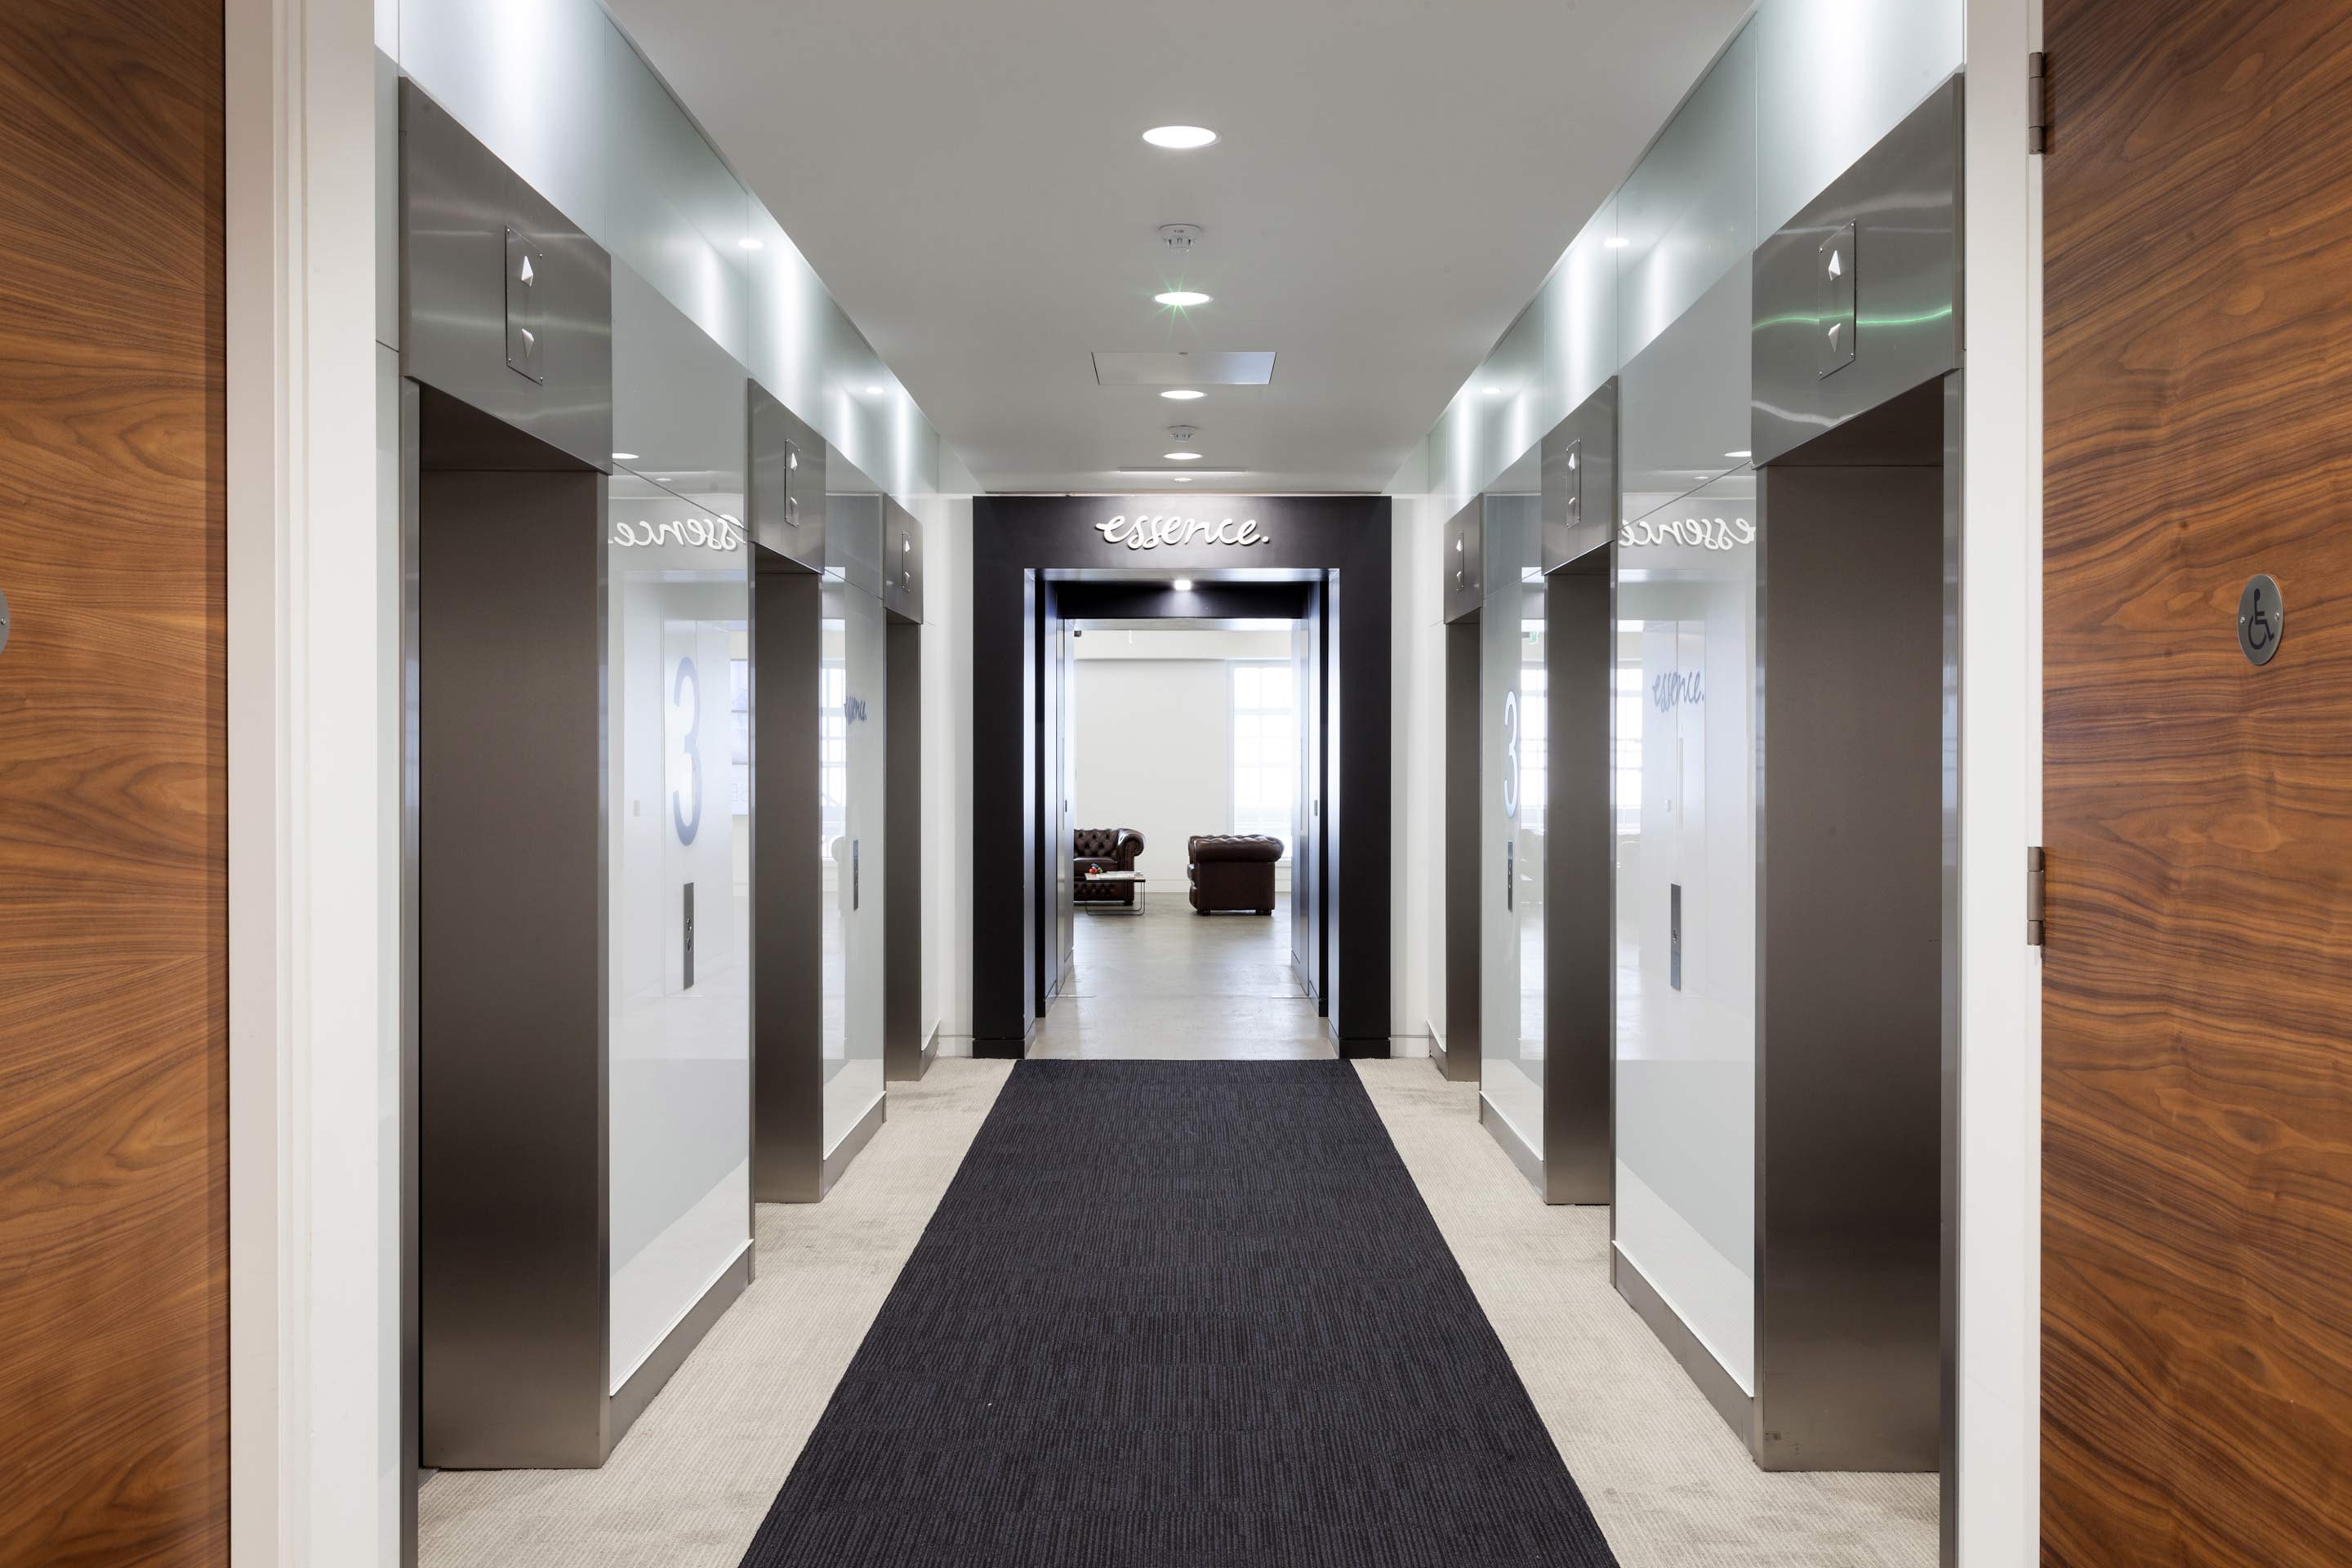 A corridor with three metal lifts on either side of the wall  a grey striped carpet running down the centre of the floor and white carpet on either side